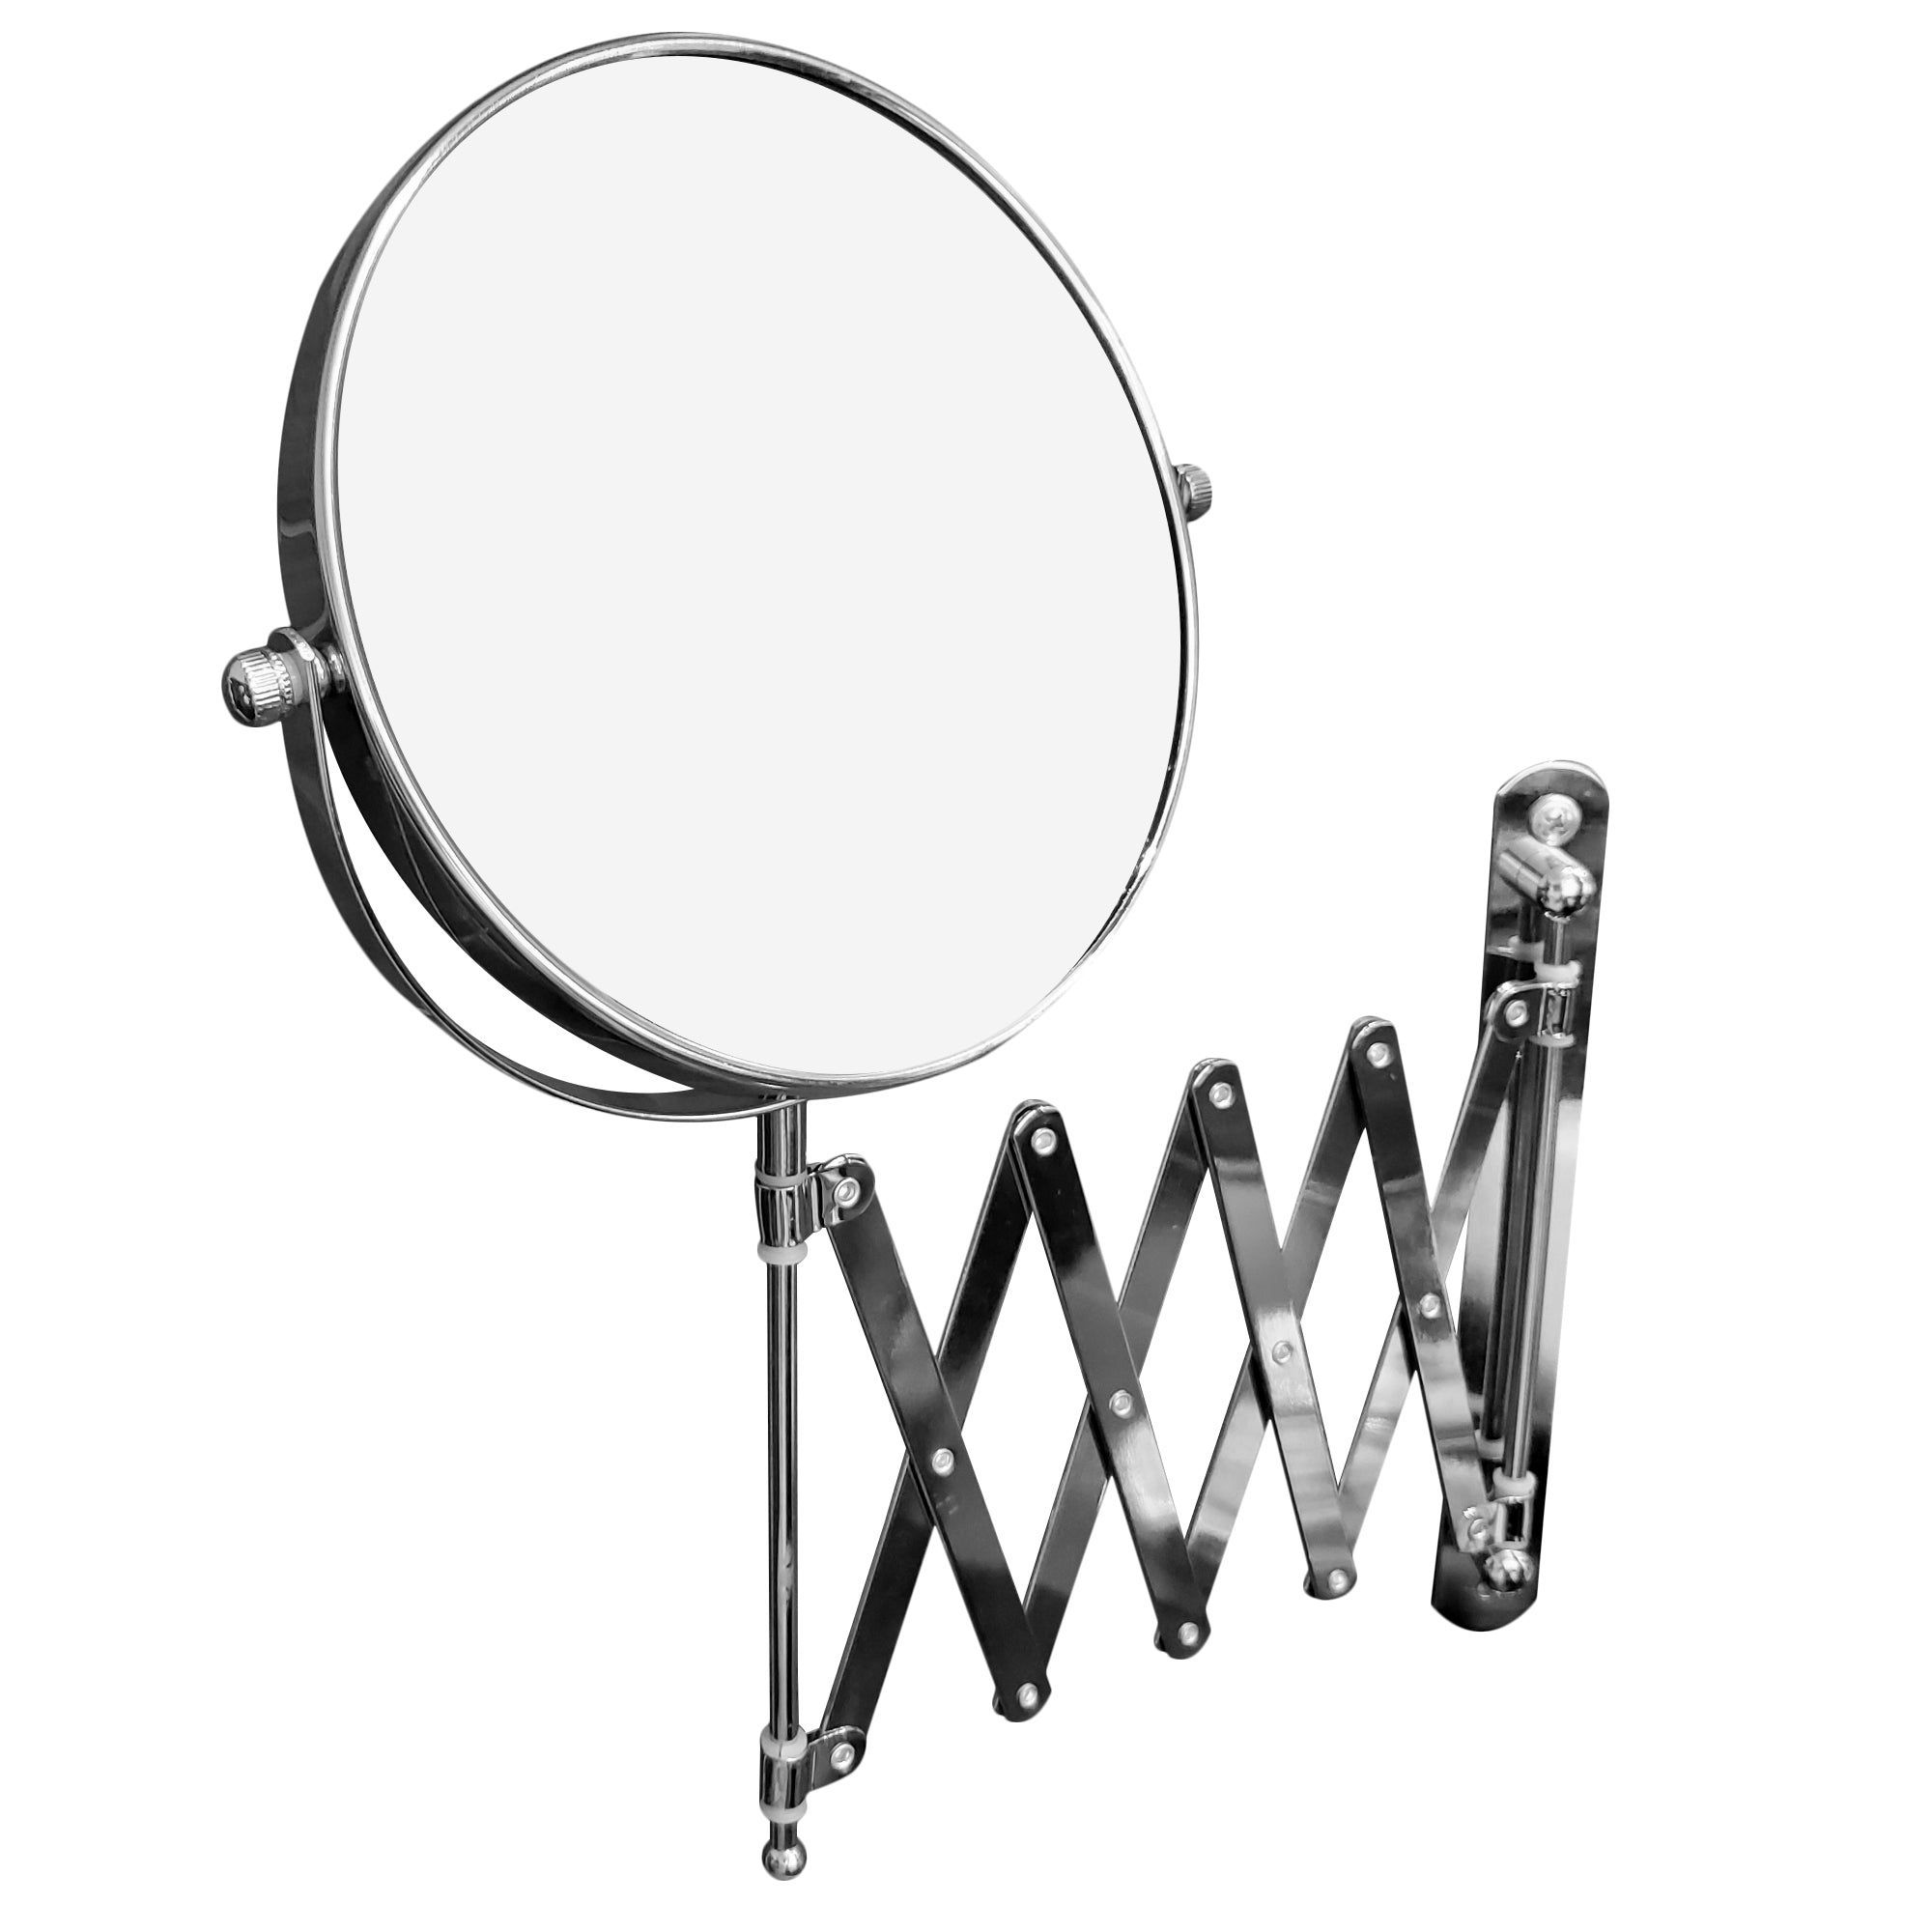 Rucci Magnification Wall Mount Extendable Mirror (M628)